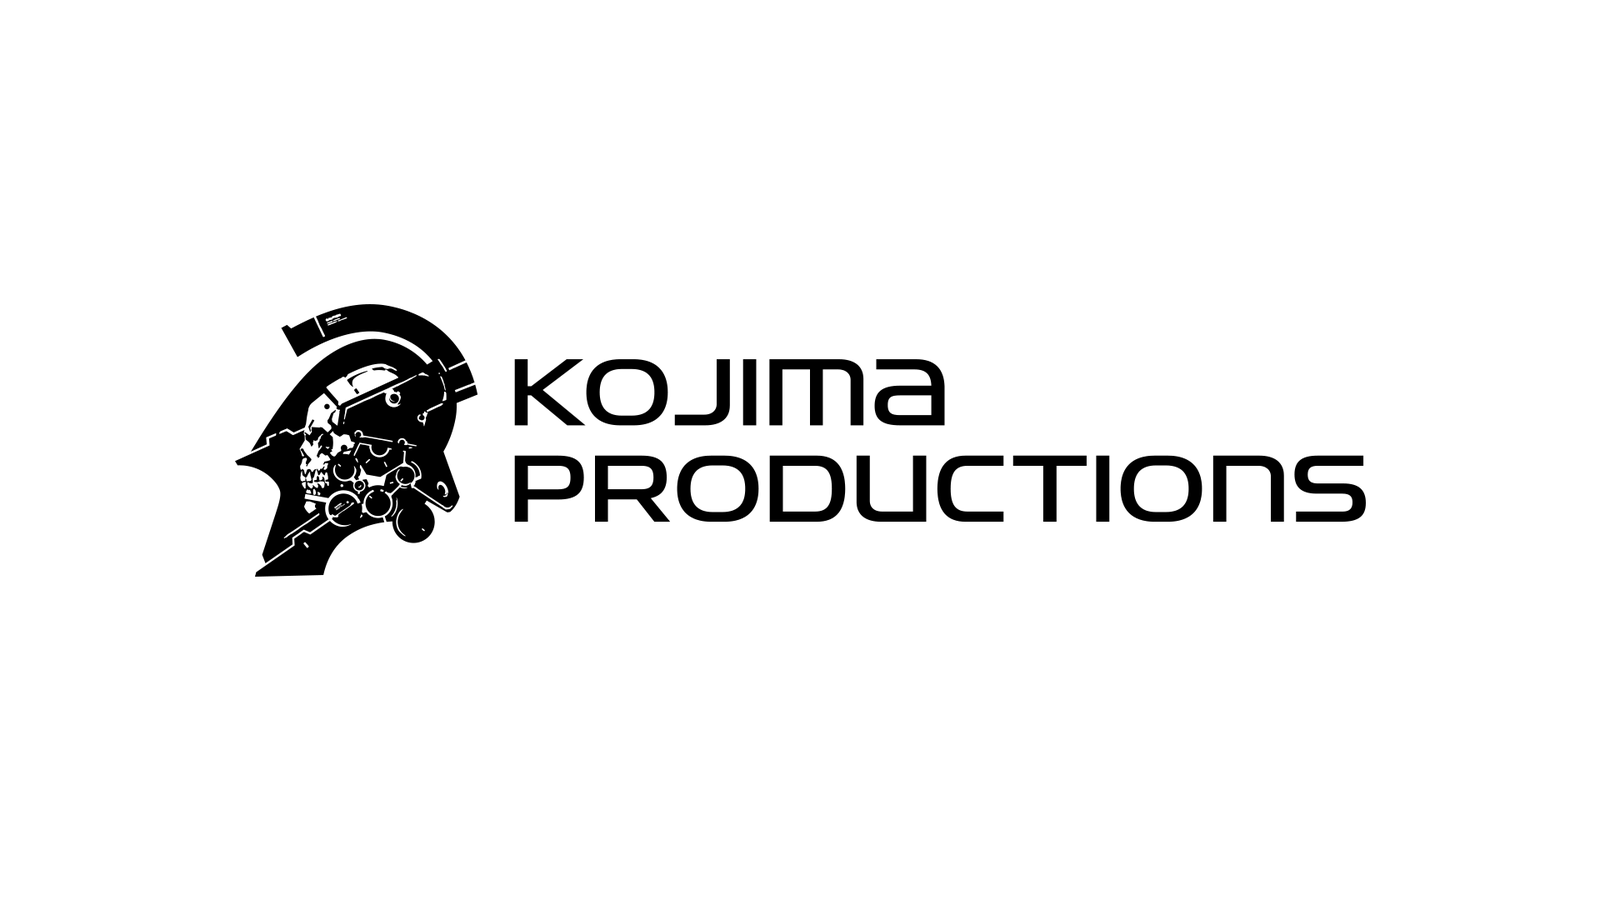 Hideo Kojima Says Kojima Productions Will Remain Independent After